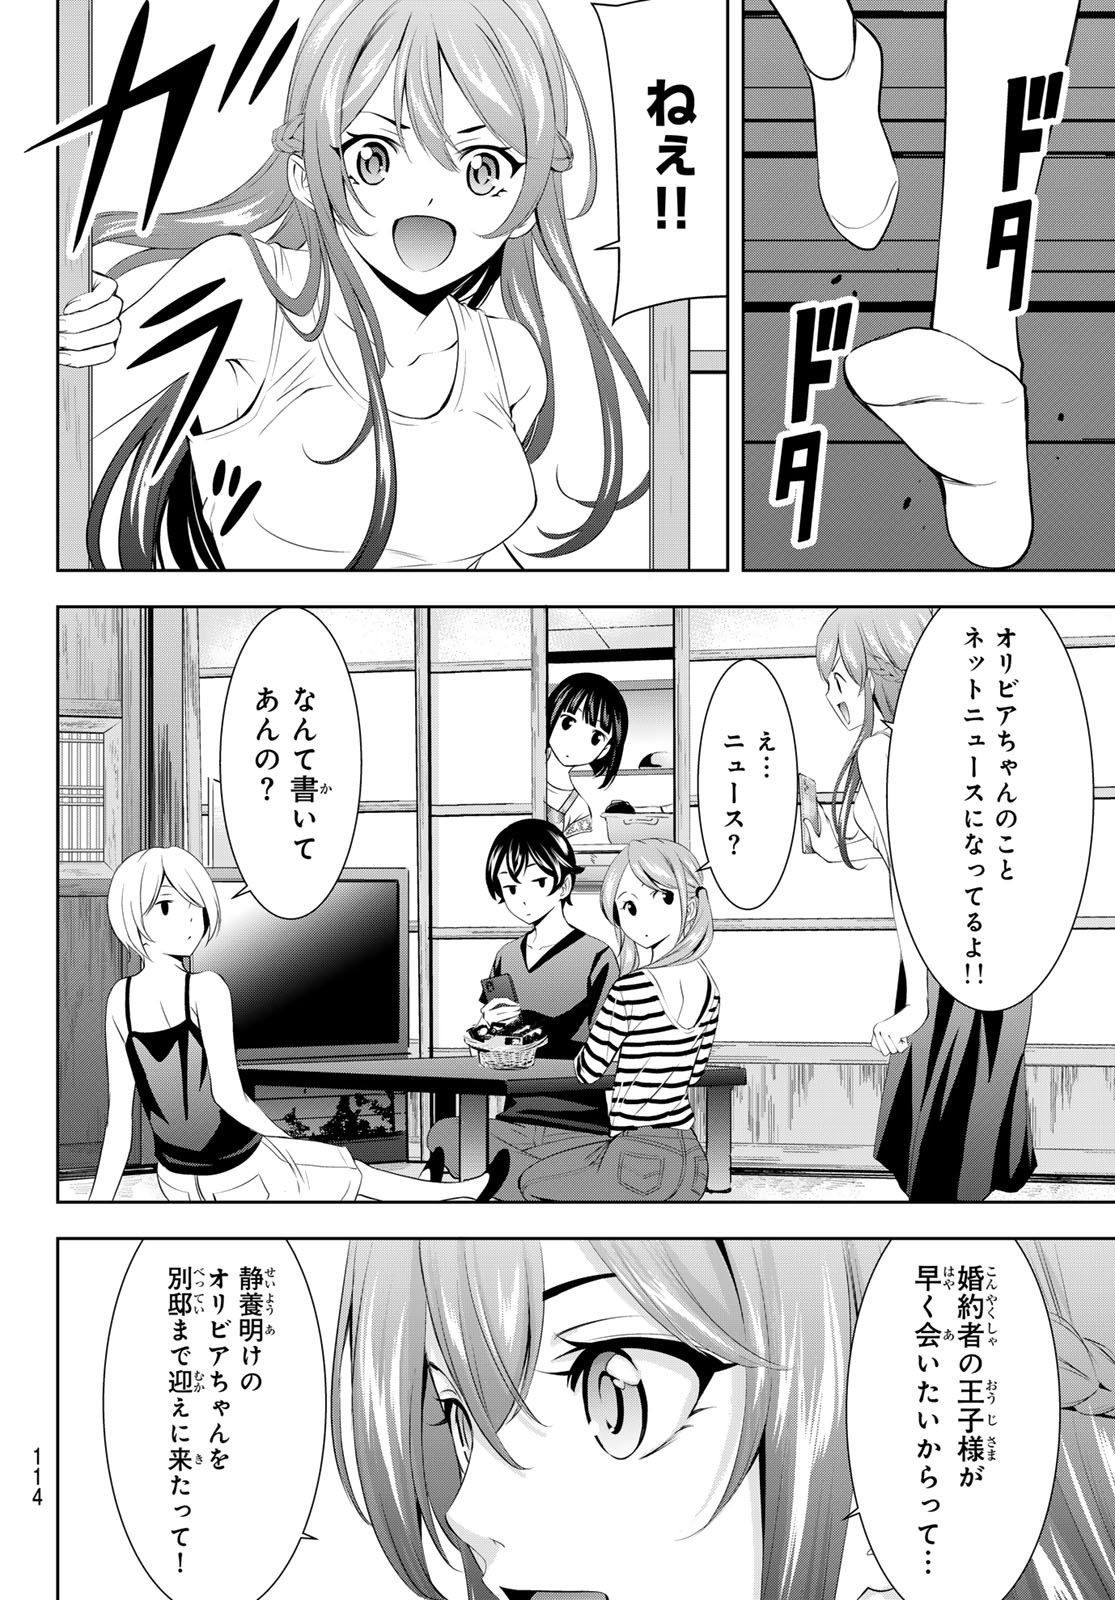 Megami no Cafe Terace - Chapter 147 - Page 14